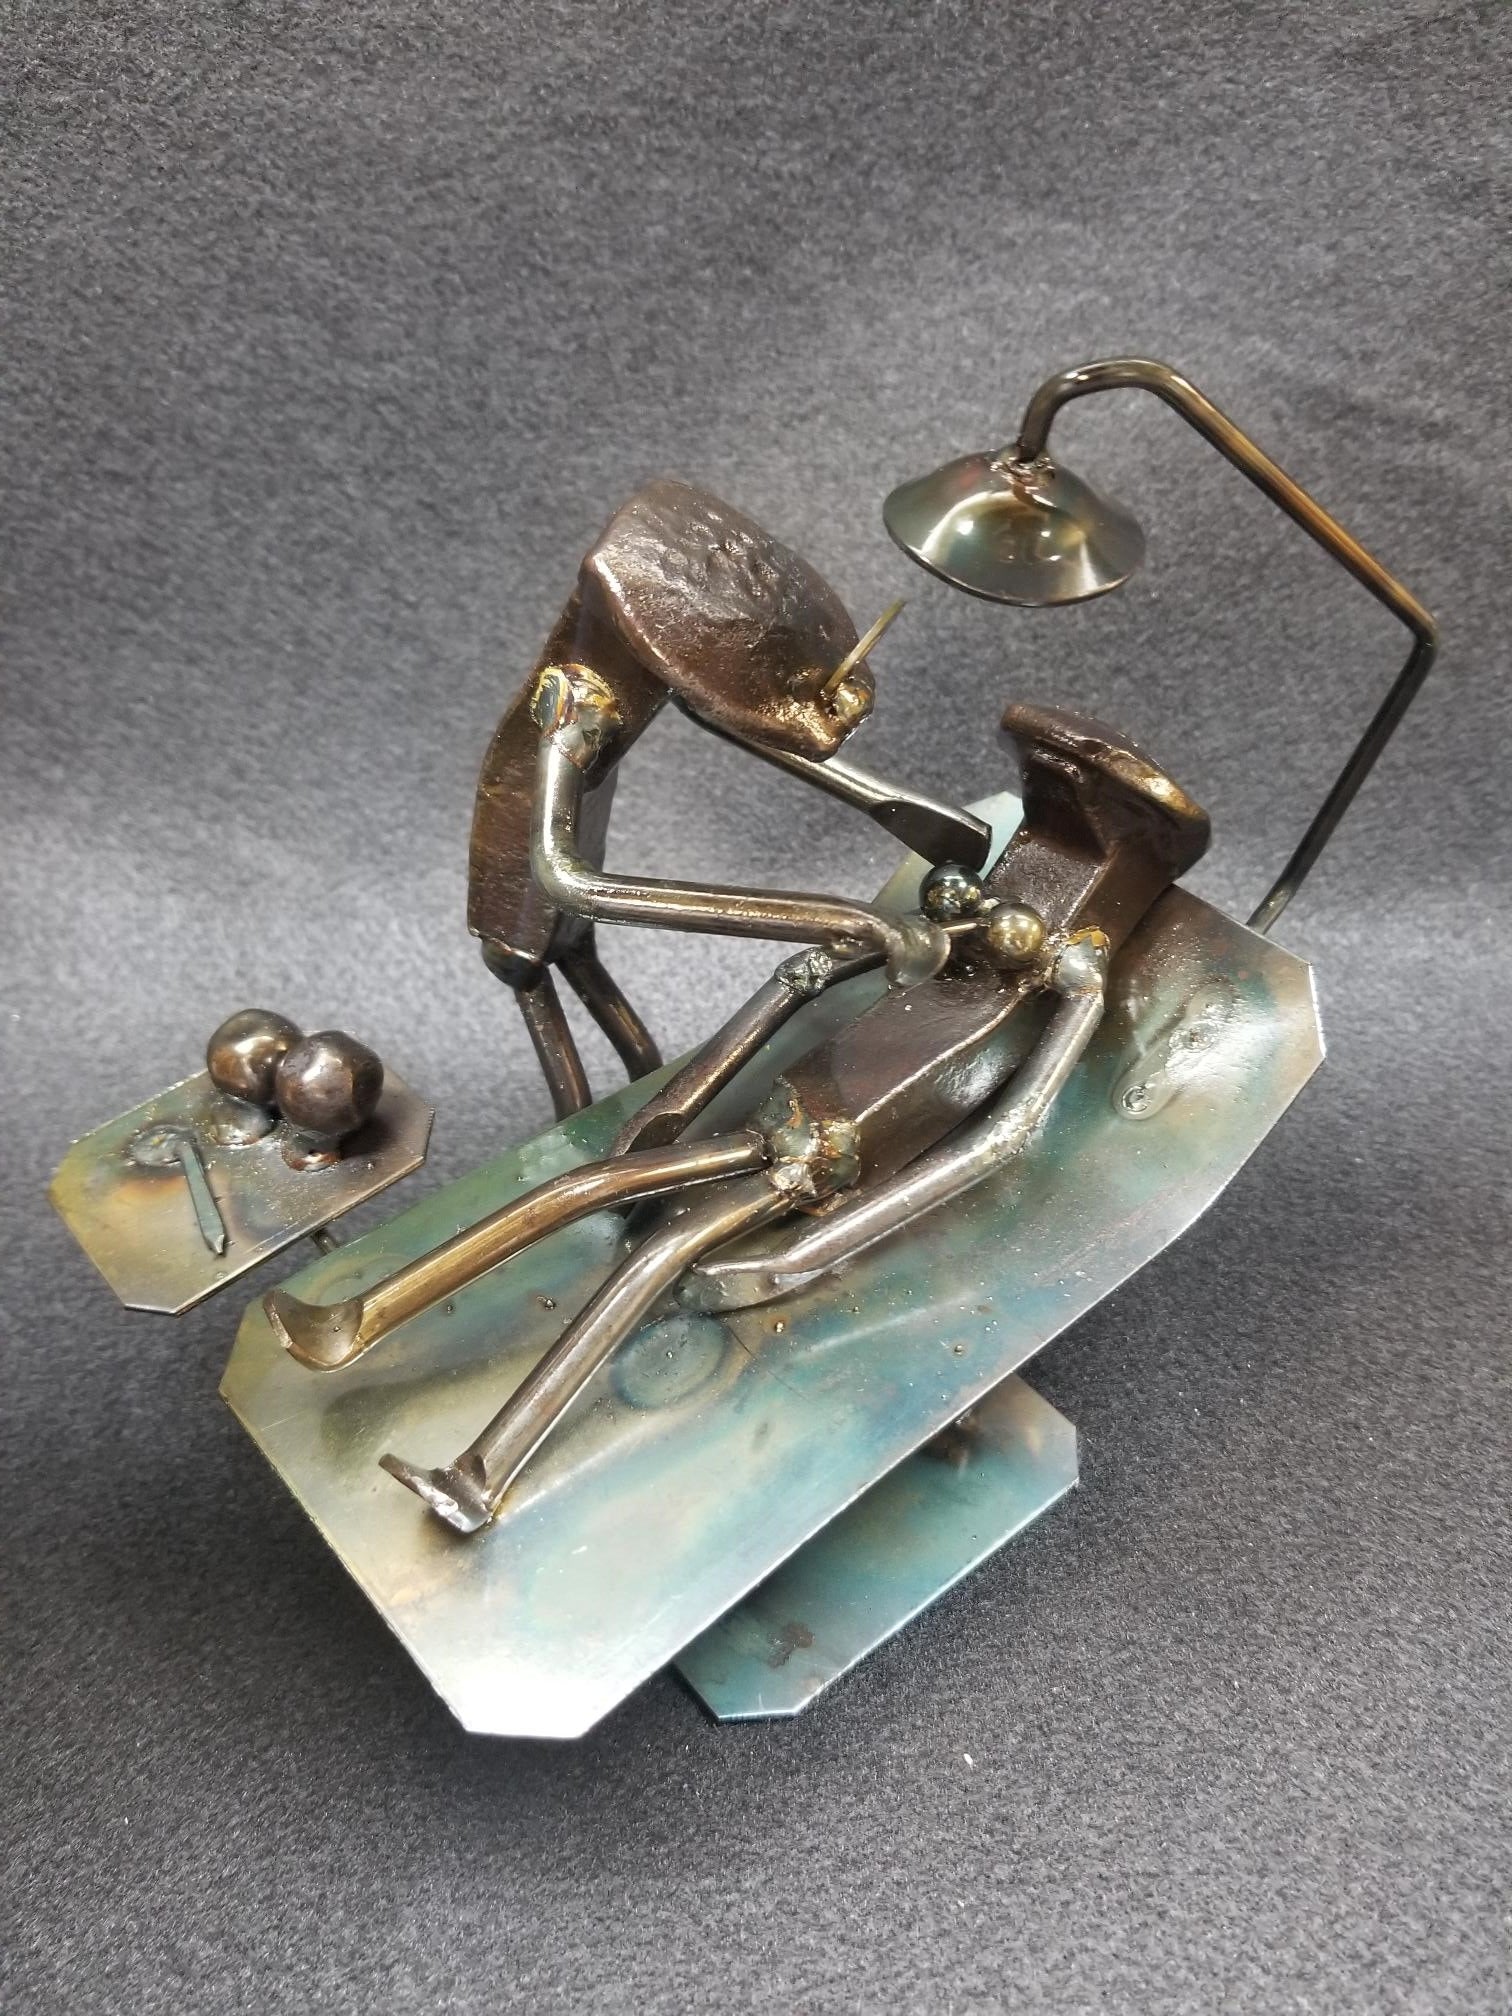 Plastic Surgeon working on patient on operating table metal spike art